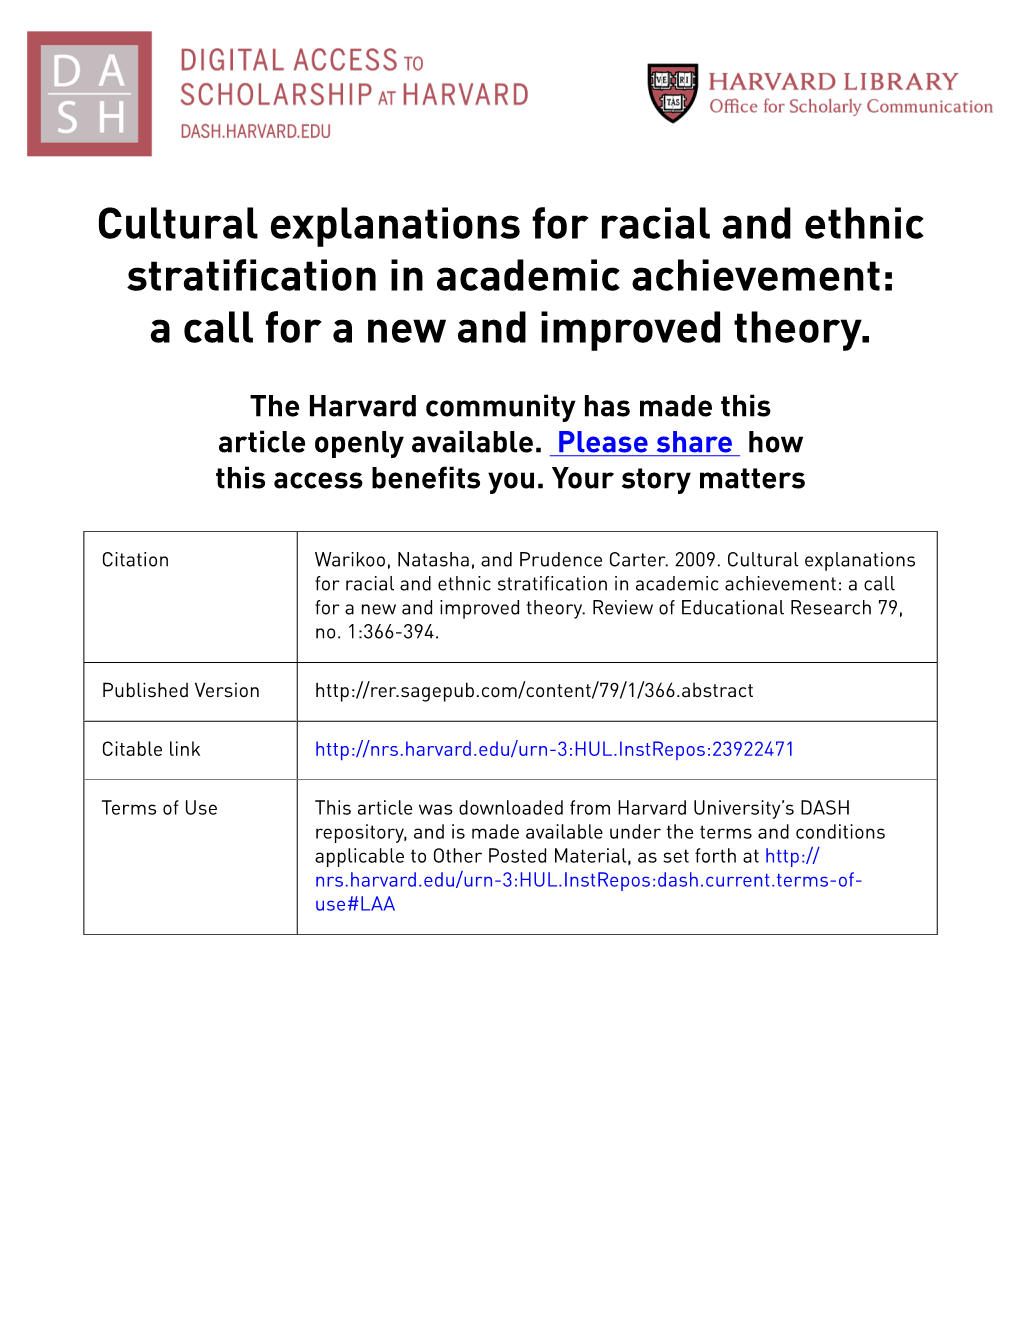 Cultural Explanations for Racial and Ethnic Stratification in Academic Achievement: a Call for a New and Improved Theory